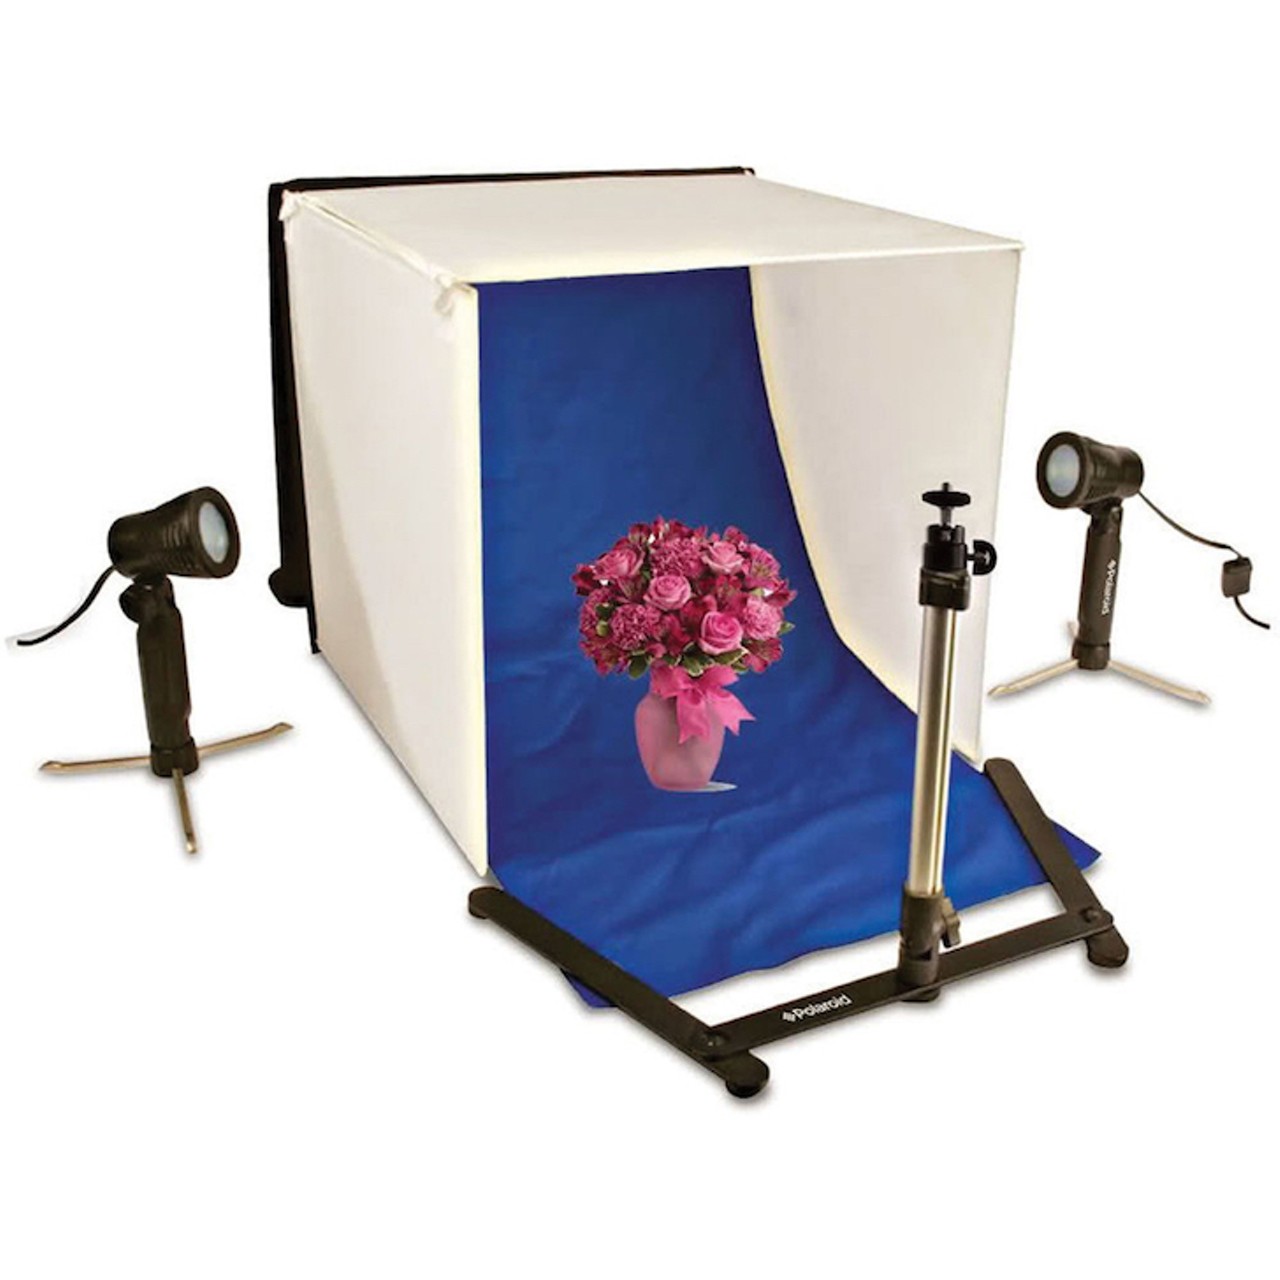 Polaroid Photo Studio Kit, $45.99
Excellent for the artist or photographer who needs an easy-to-set-up tabletop photo studio for a small workspace. Take pictures of small items like jewelry, enamel pins or anything smaller than a loaf of bread.